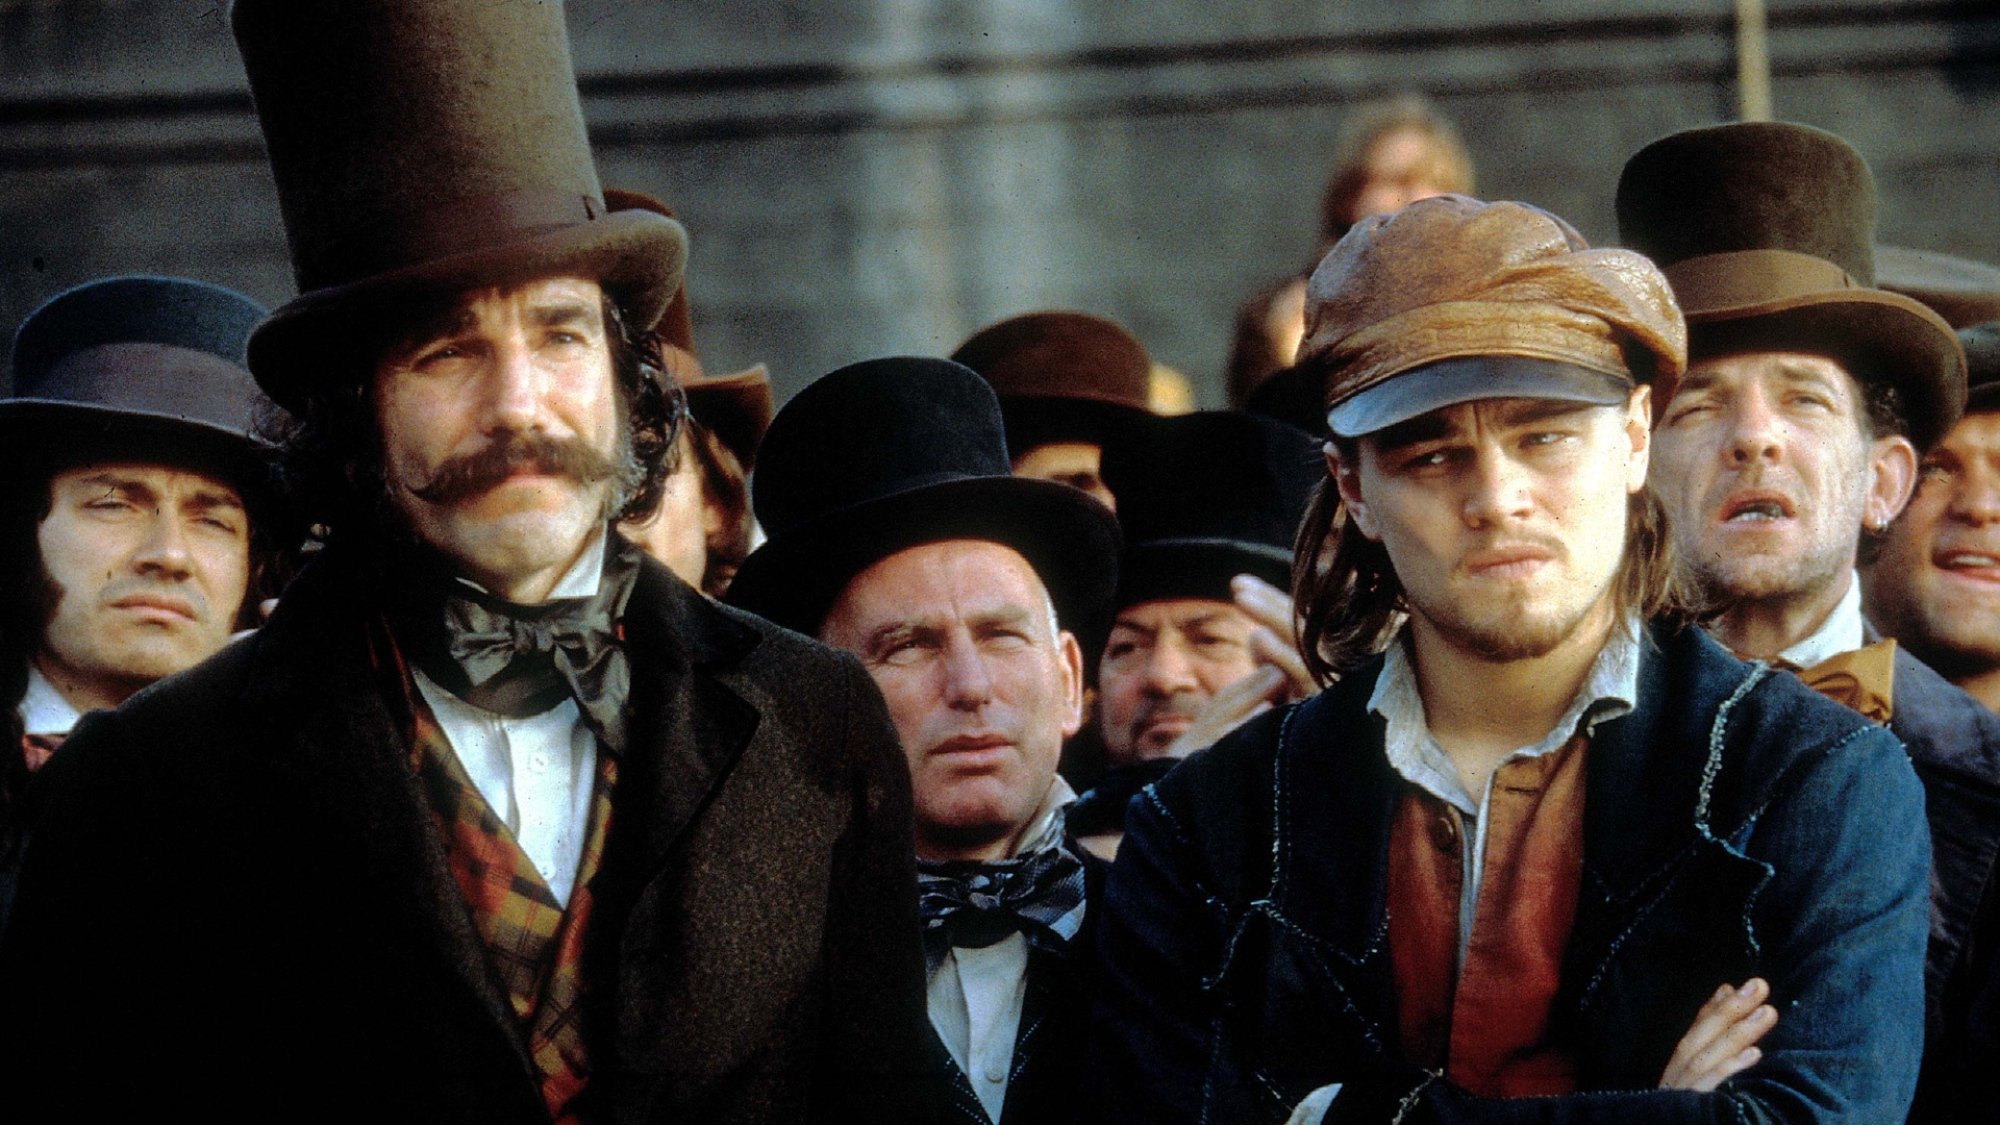 Daniel Day-Lewis and Leonardo Dicaprio in "Gangs of New York."